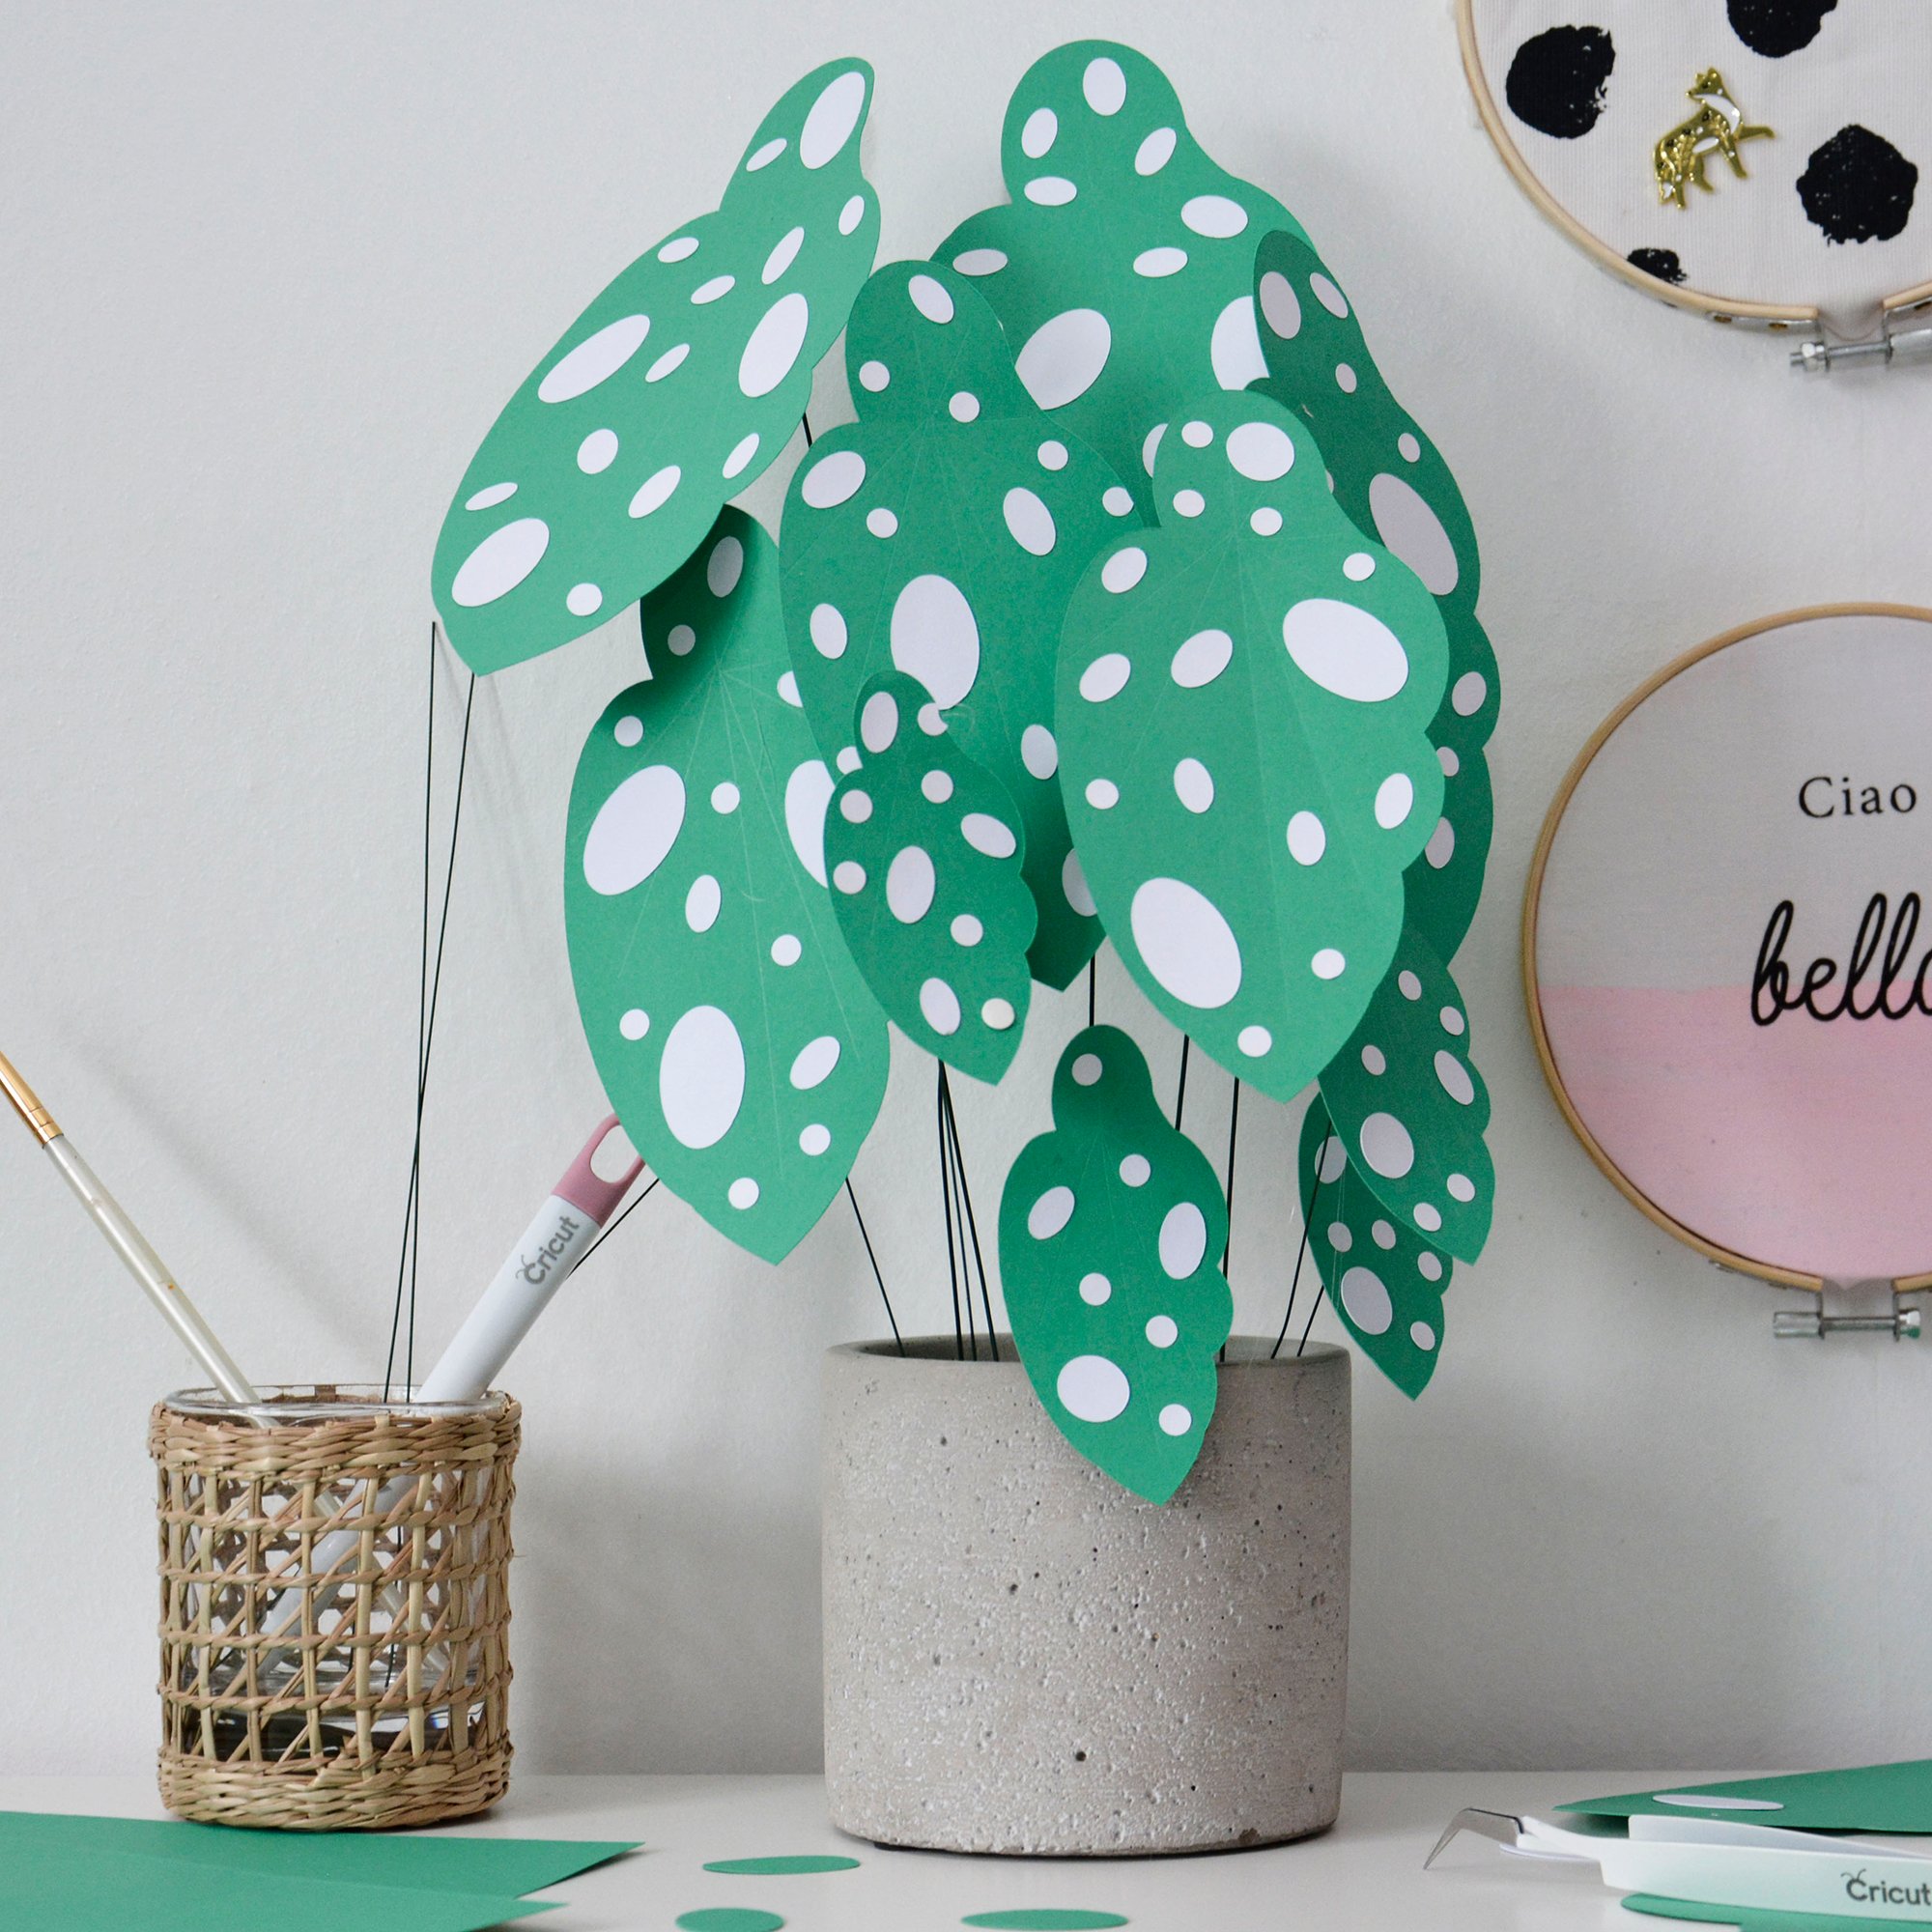 Cricut: How to Make a Paper Begonia Maculata Plant | Hobbycraft